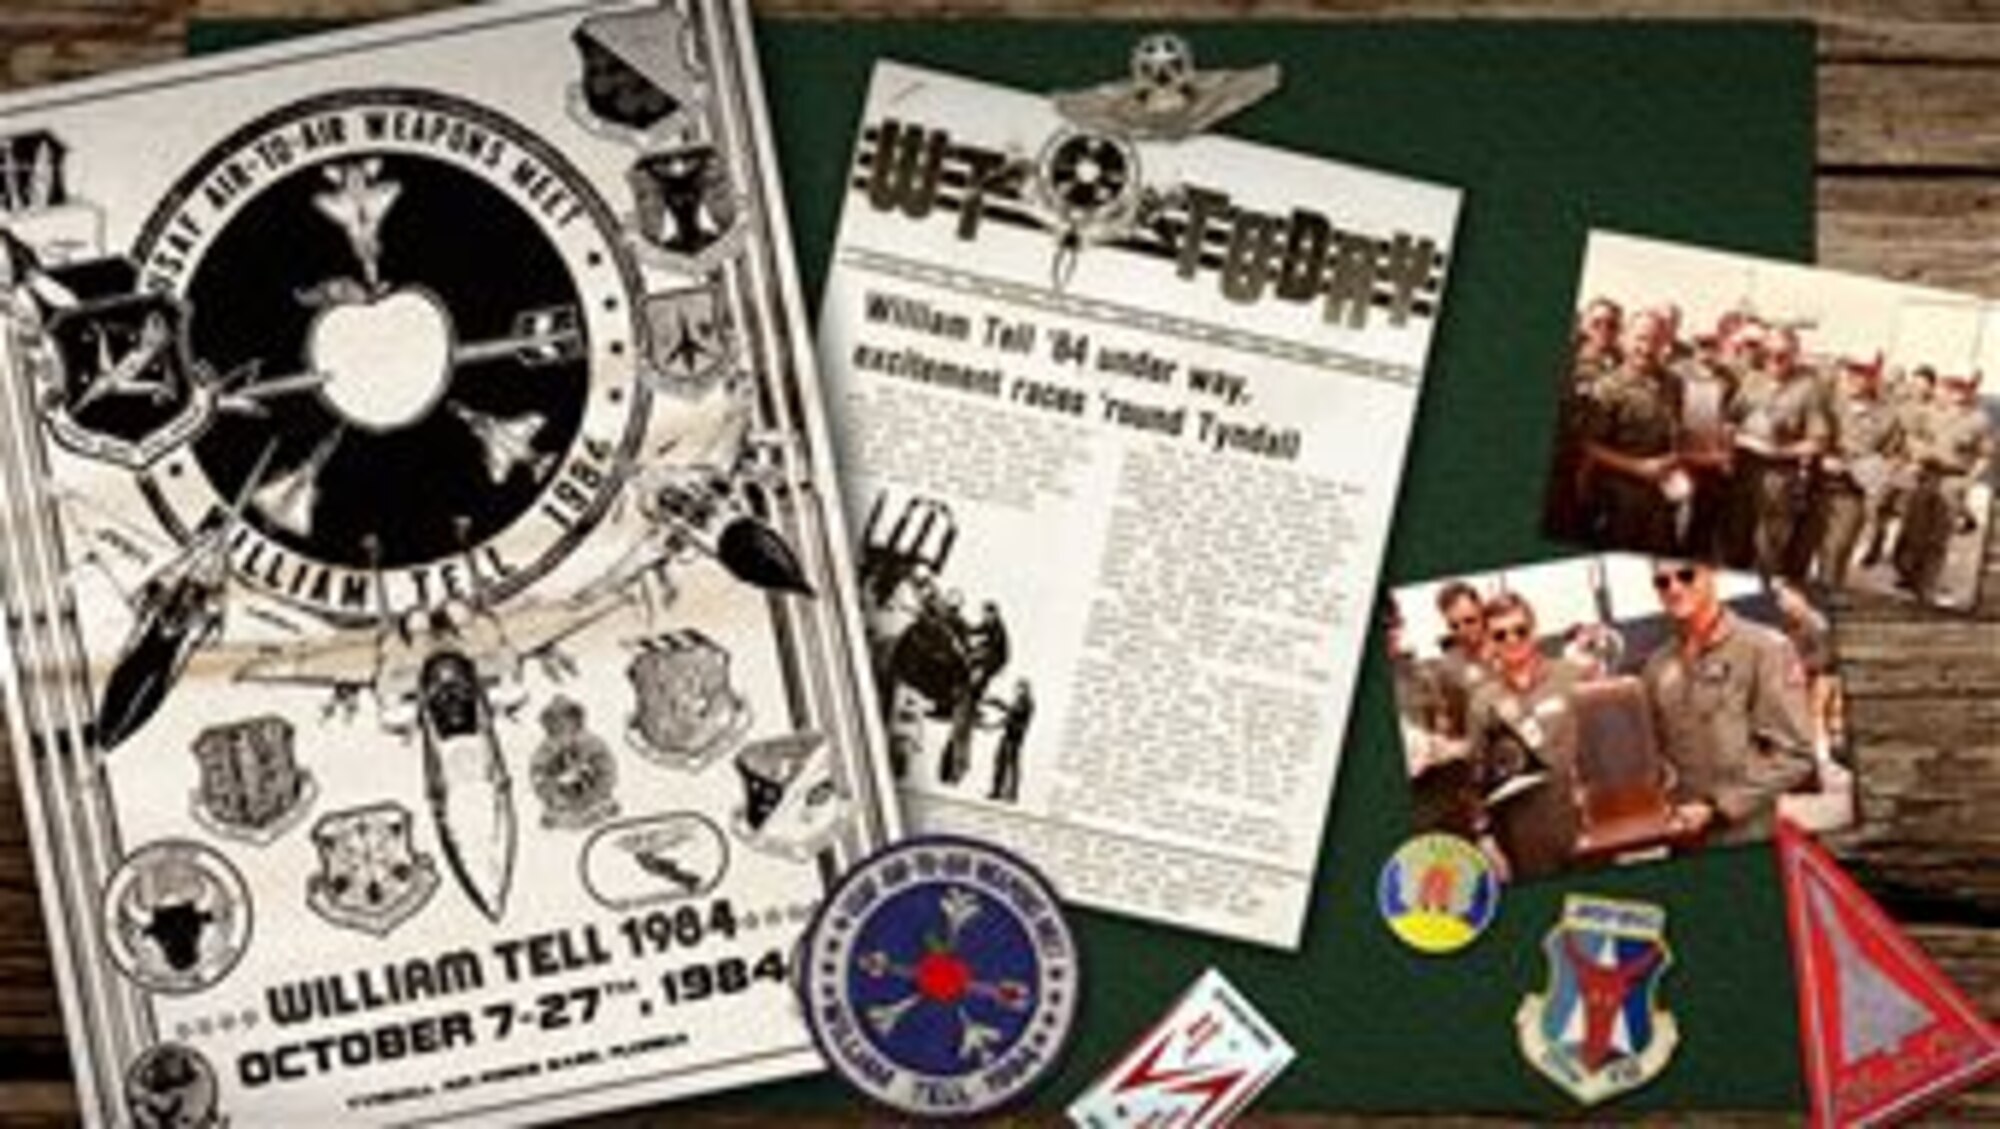 Old Tyndall Air Force base Papers, William Tell '84 artifacts, and 177th Fighter Interceptor Group memorabilia can be seen in this digital art piece. (U.S. Air National Guard digital art by Tech. Sgt. Matt Hecht)